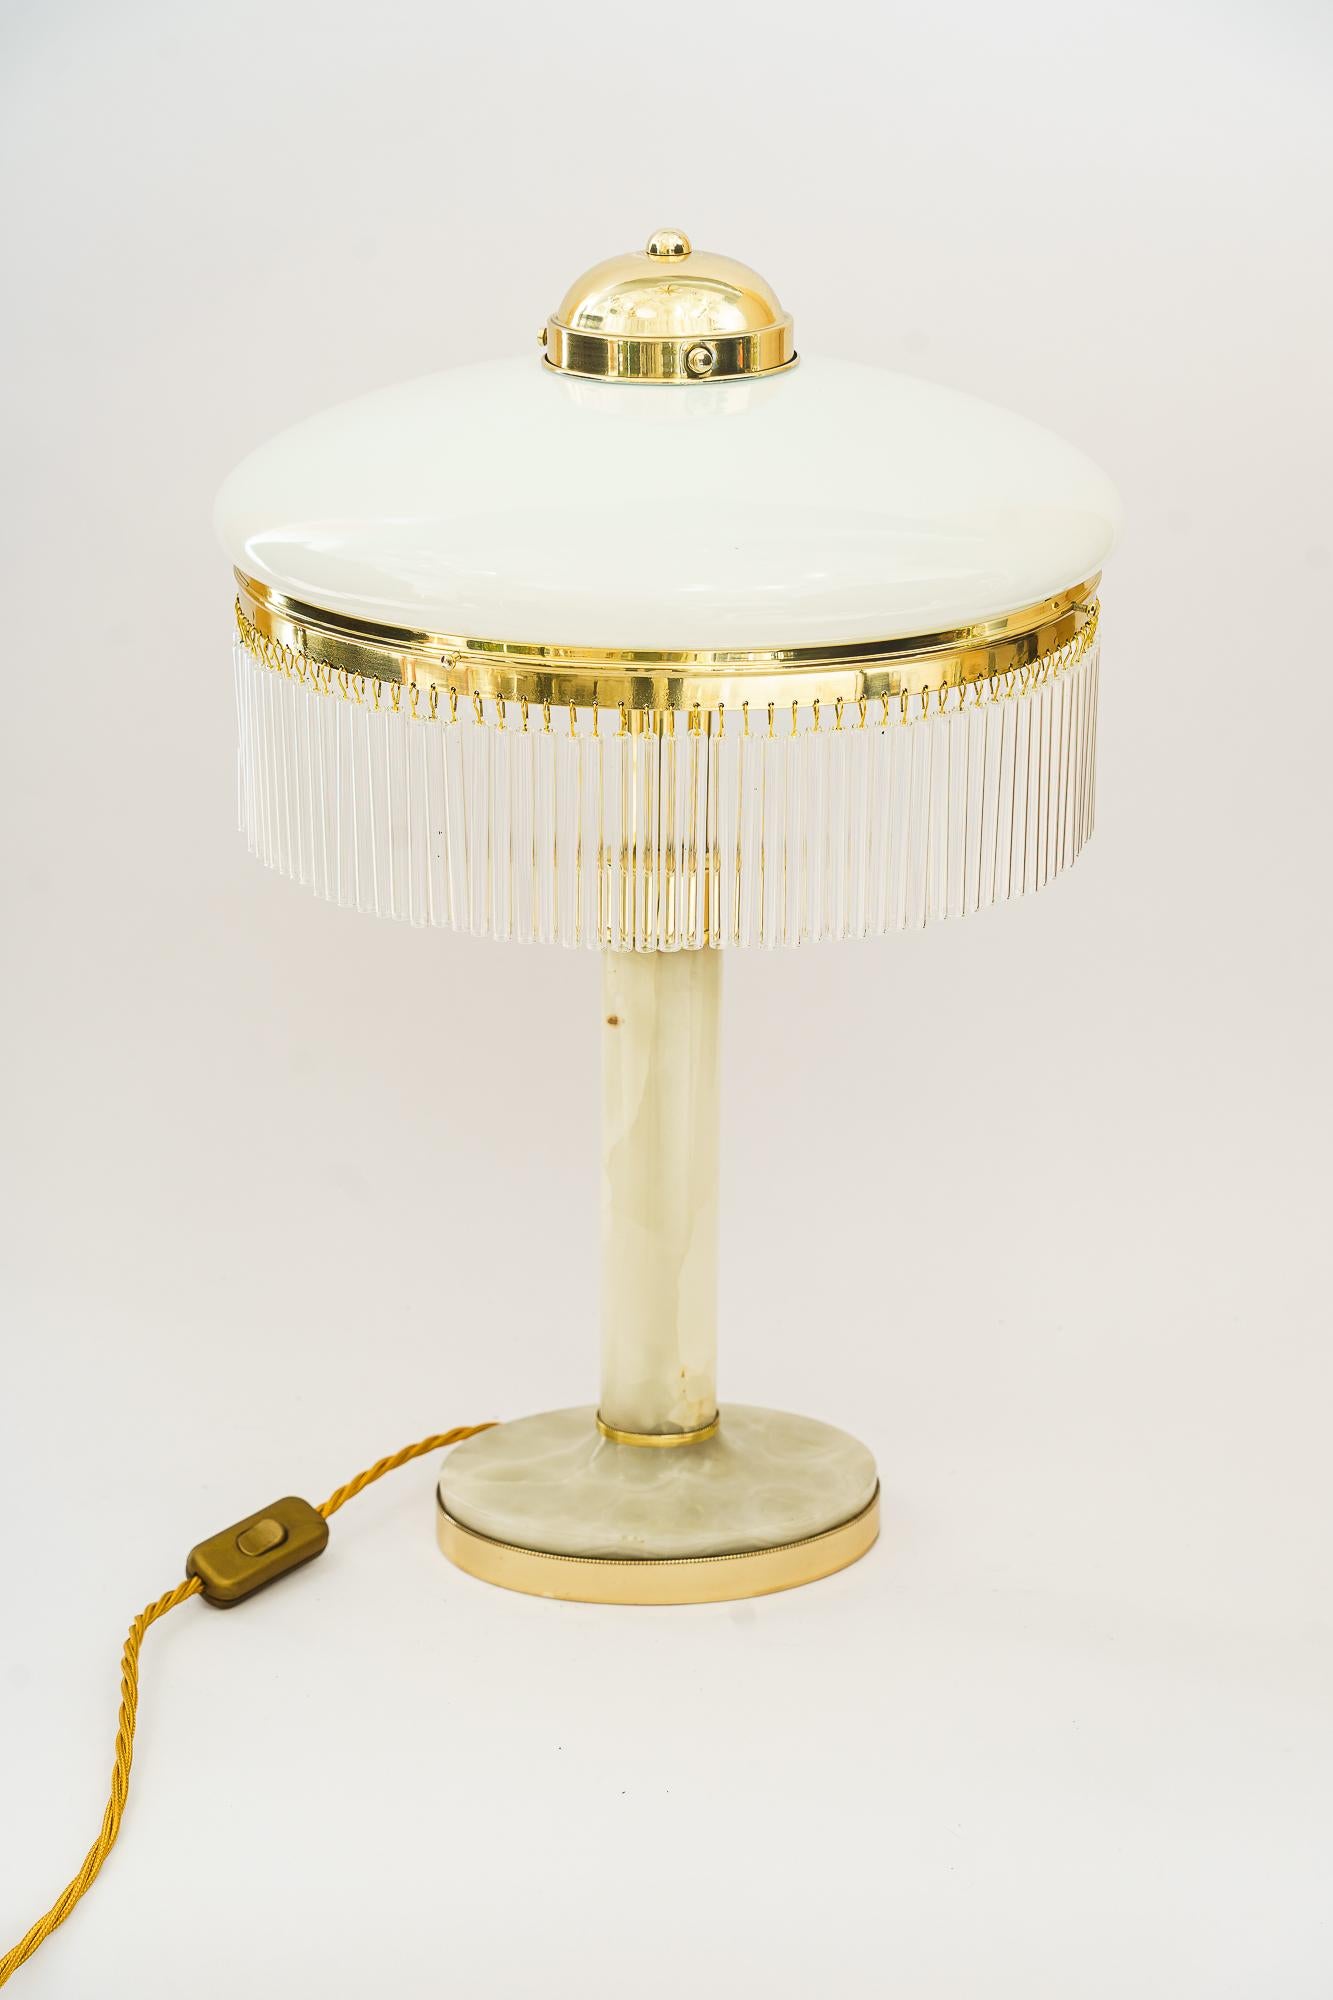 Art Deco Brass and Marble Table lamp with opal glass shade and glass sticks 1920s
Brass polished and stove enameled
Original antique opal glass shade
The glass sticks are replaced ( new )